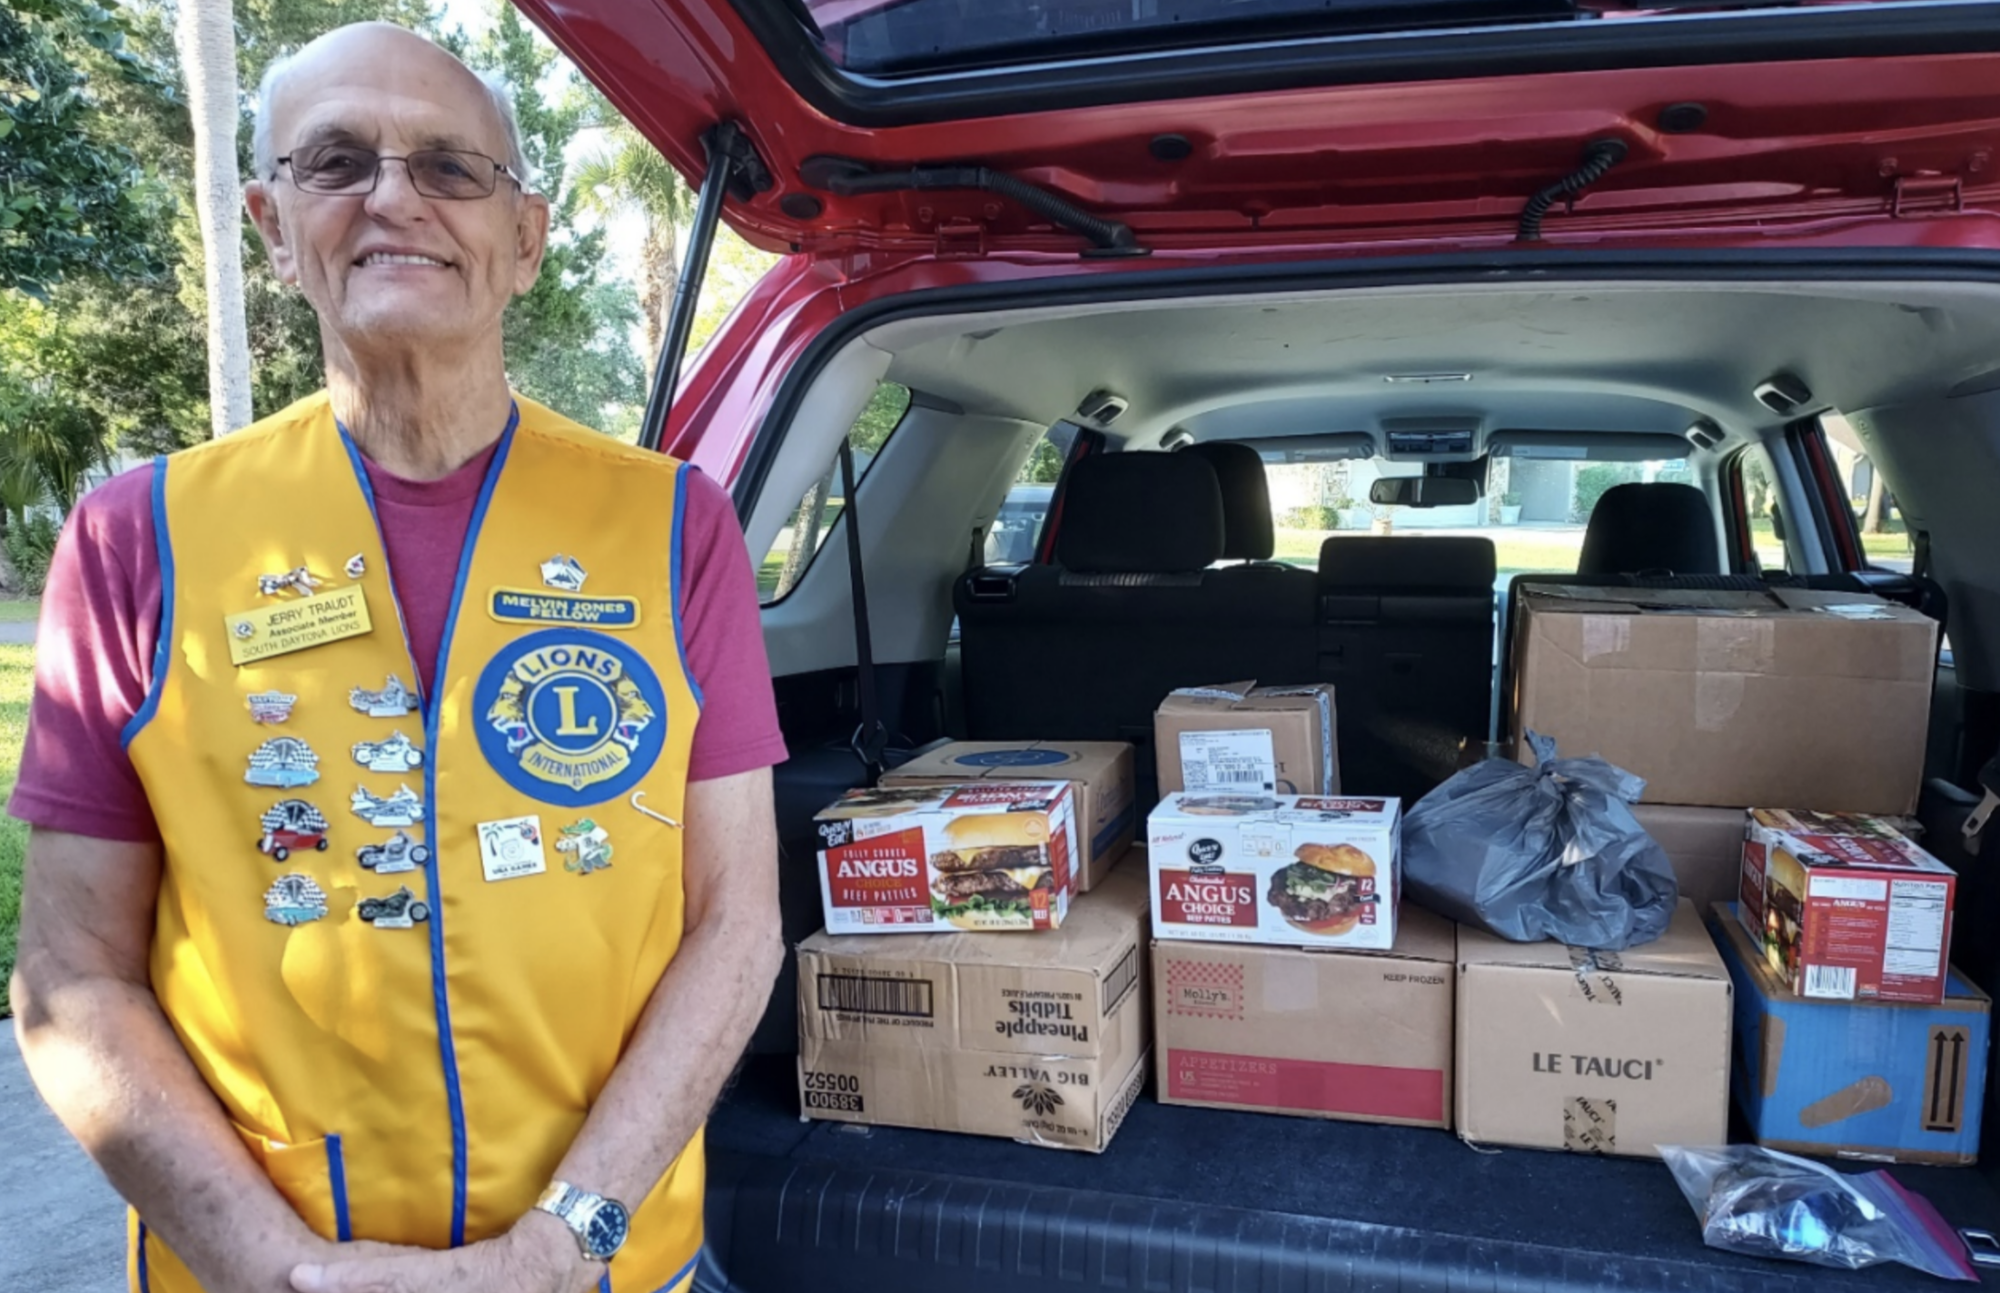 South Daytona Lions Club member Jerry Traudt with the boxes containing 704 pairs of eyeglasses collected during April by the Lions Clubs in East Volusia County. Courtesy photo